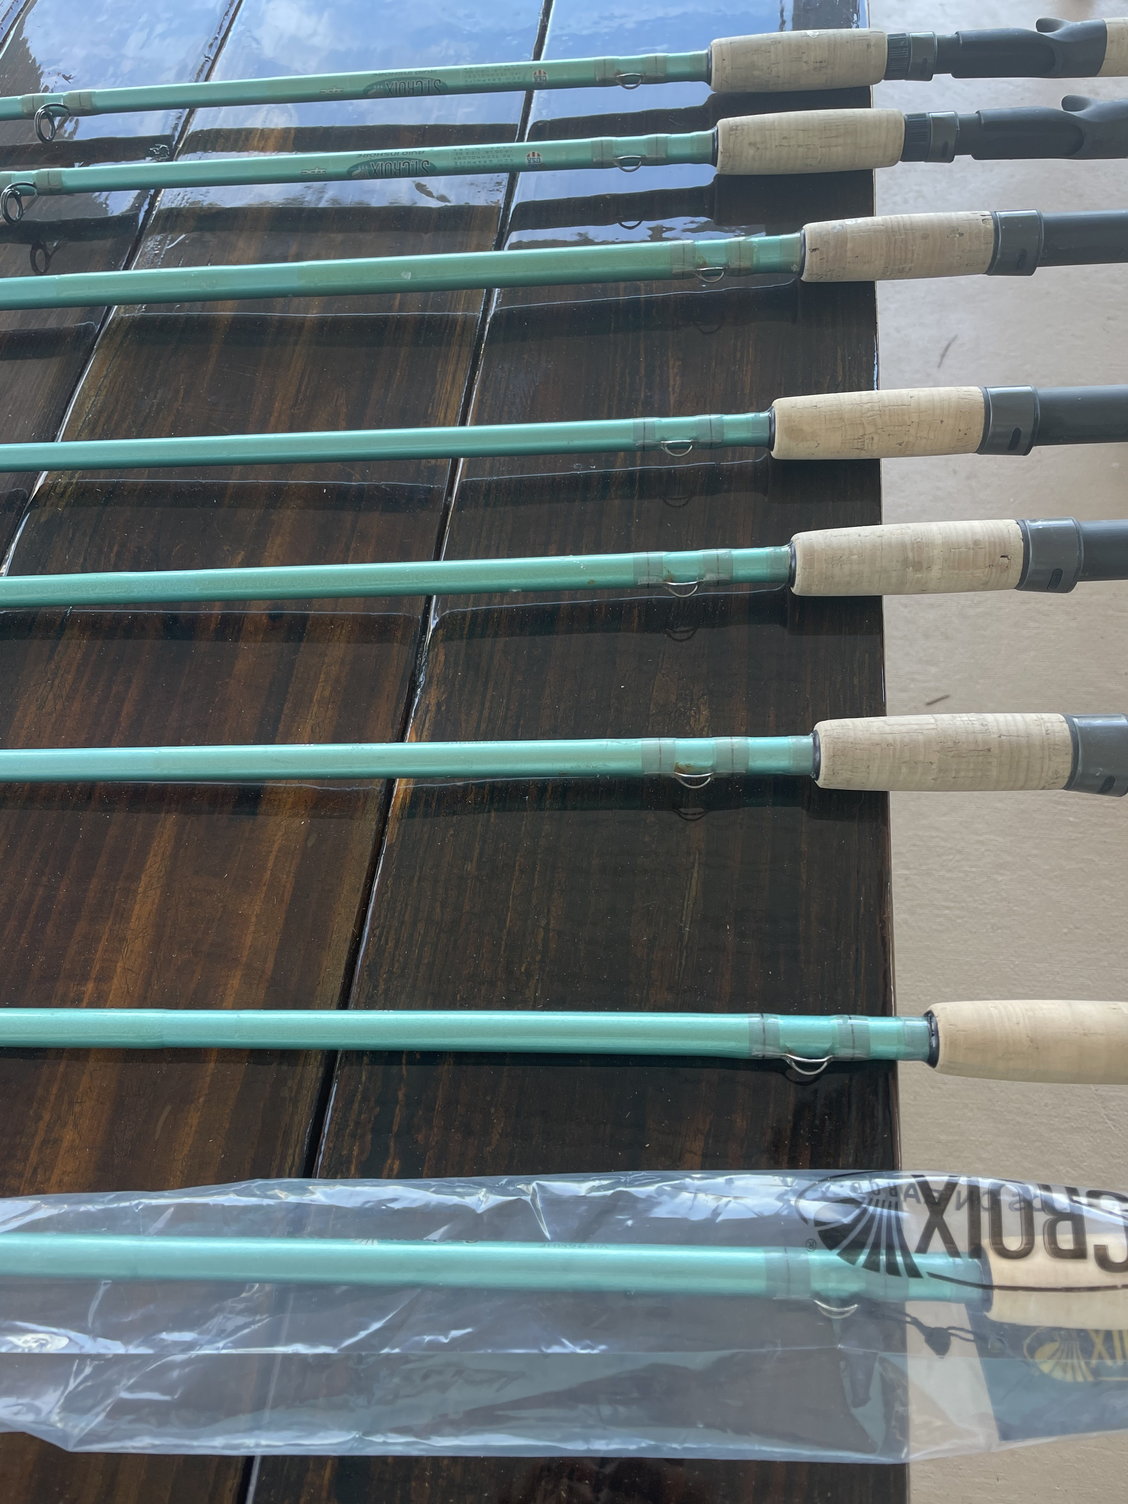 St Croix Avid Inshore rods For Sale - The Hull Truth - Boating and